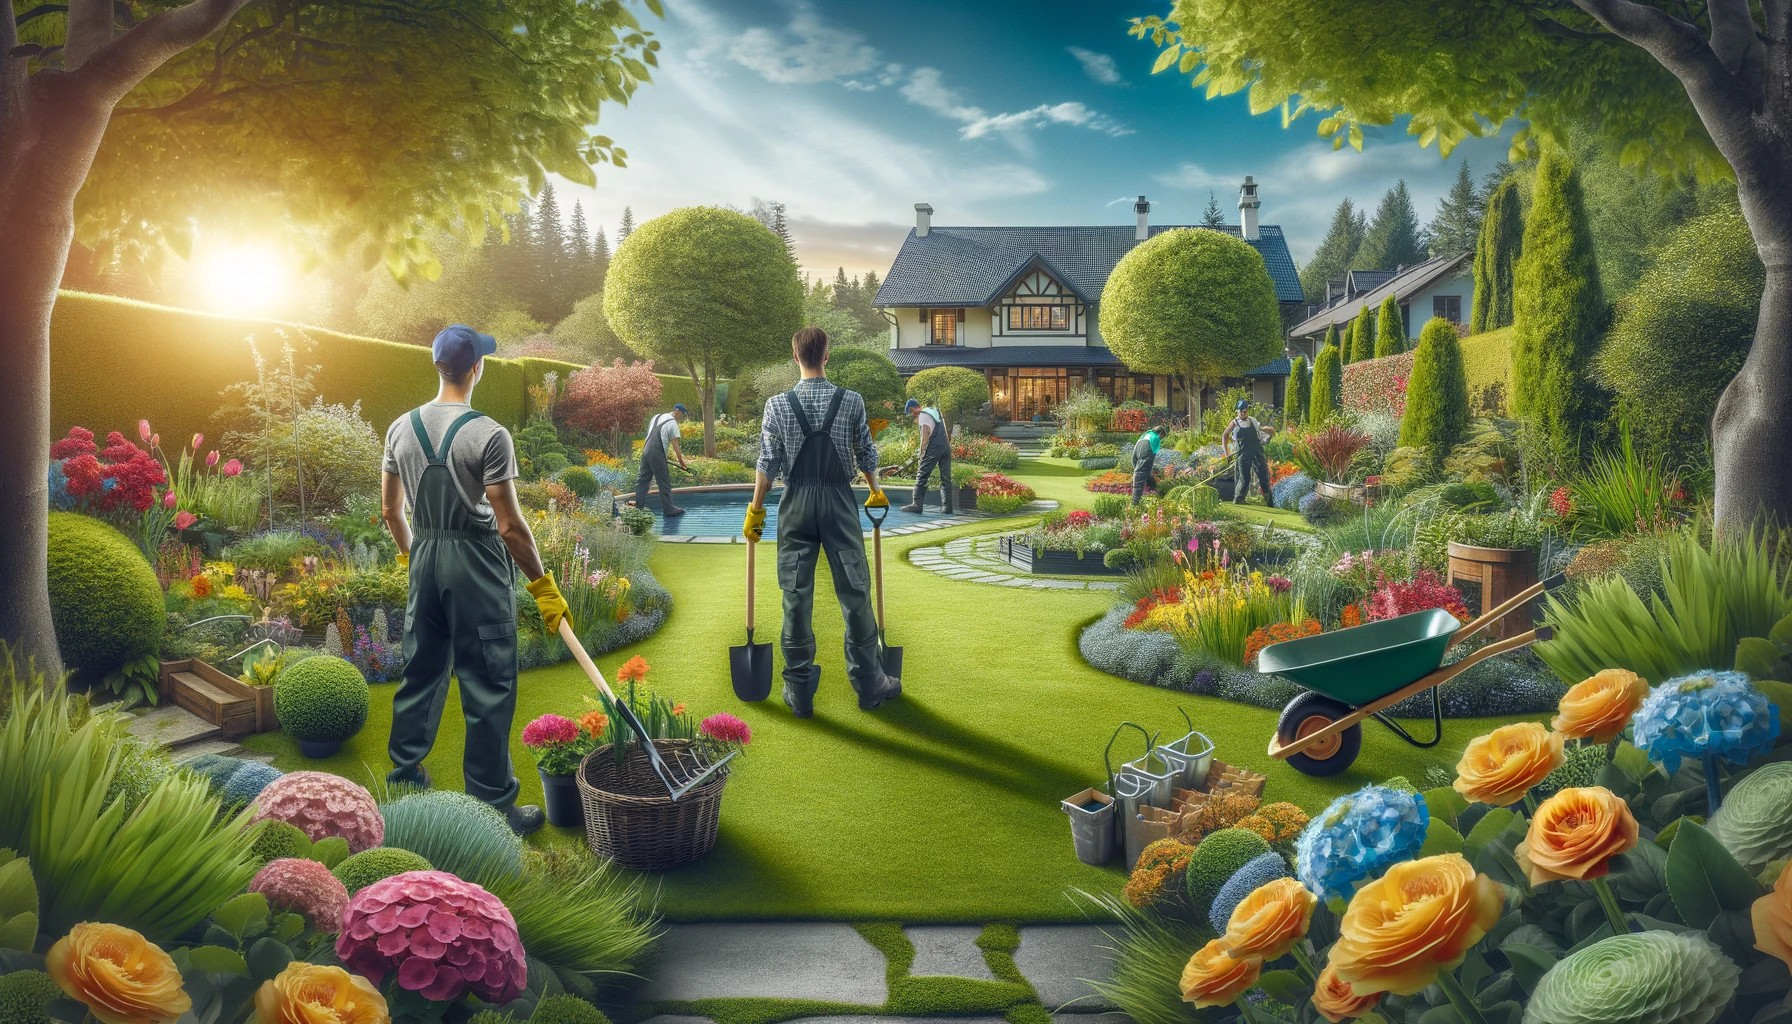 Team of landscapers working in a beautiful garden with vibrant flowers, lush green lawns, and various gardening tools, with a well-maintained property and clear blue sky in the background.